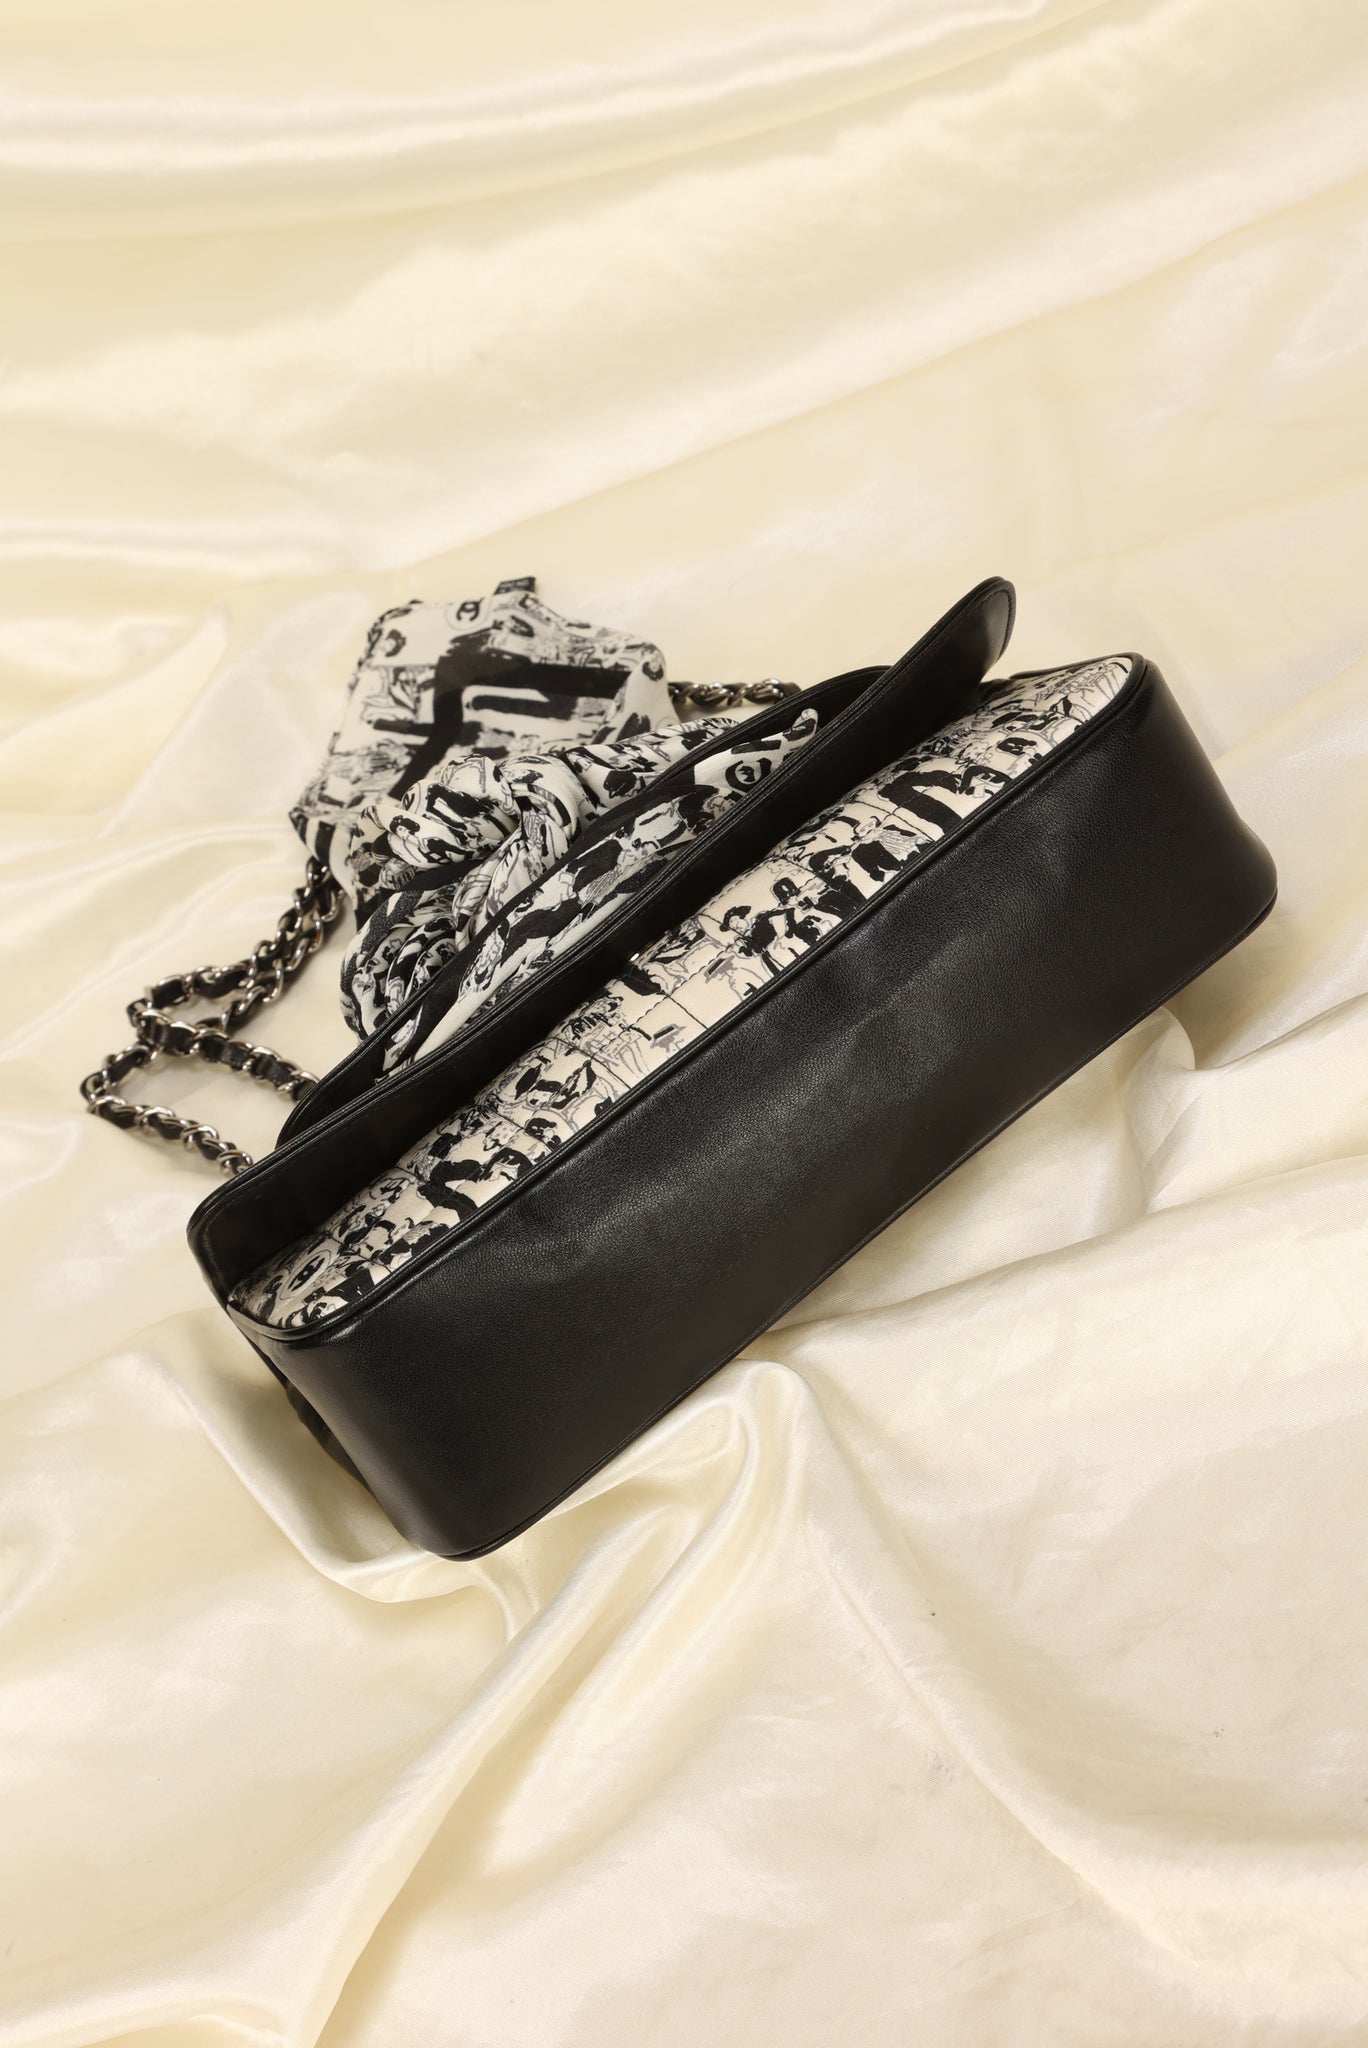 Rare Chanel Satin Flap Bag with Scarf